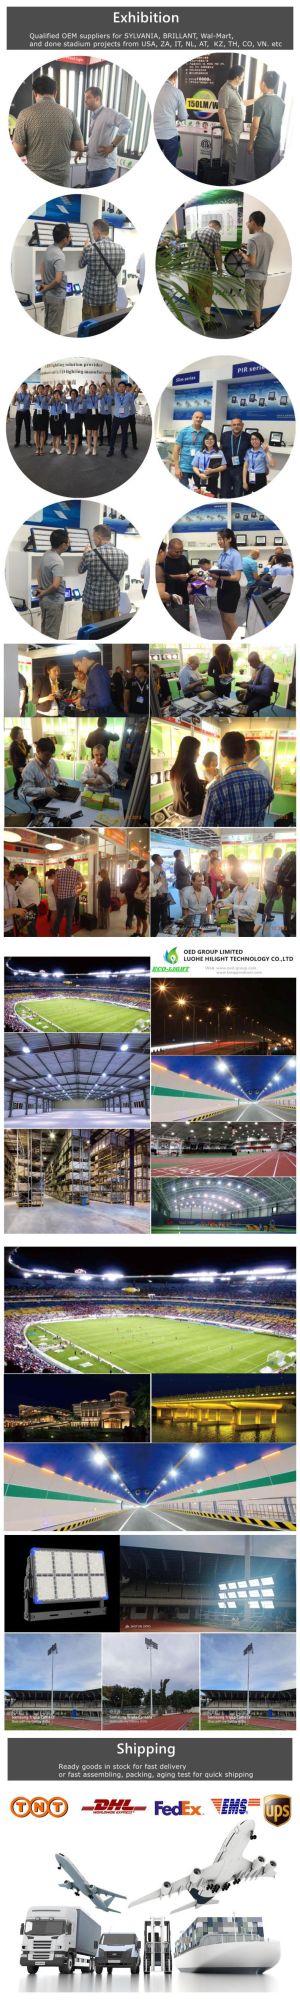 Wholesale Price SMD2835 High Brightness Waterproof IP66 20W LED Floodlight with RGB